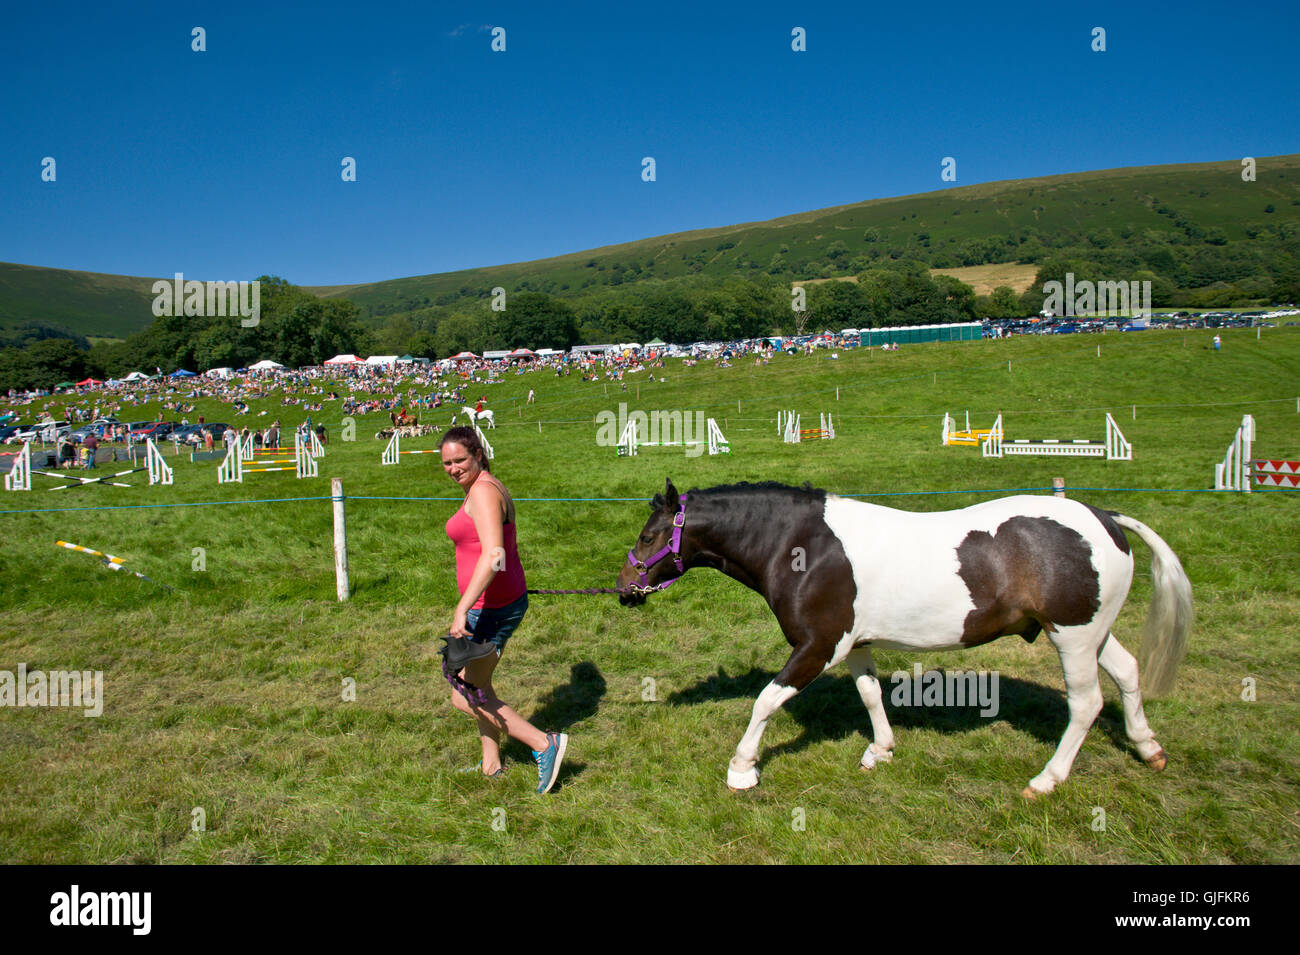 Woman leading horse at Llanthony Show in the Black Mountains near Abergavenny Monmouthshire South Wales UK Stock Photo